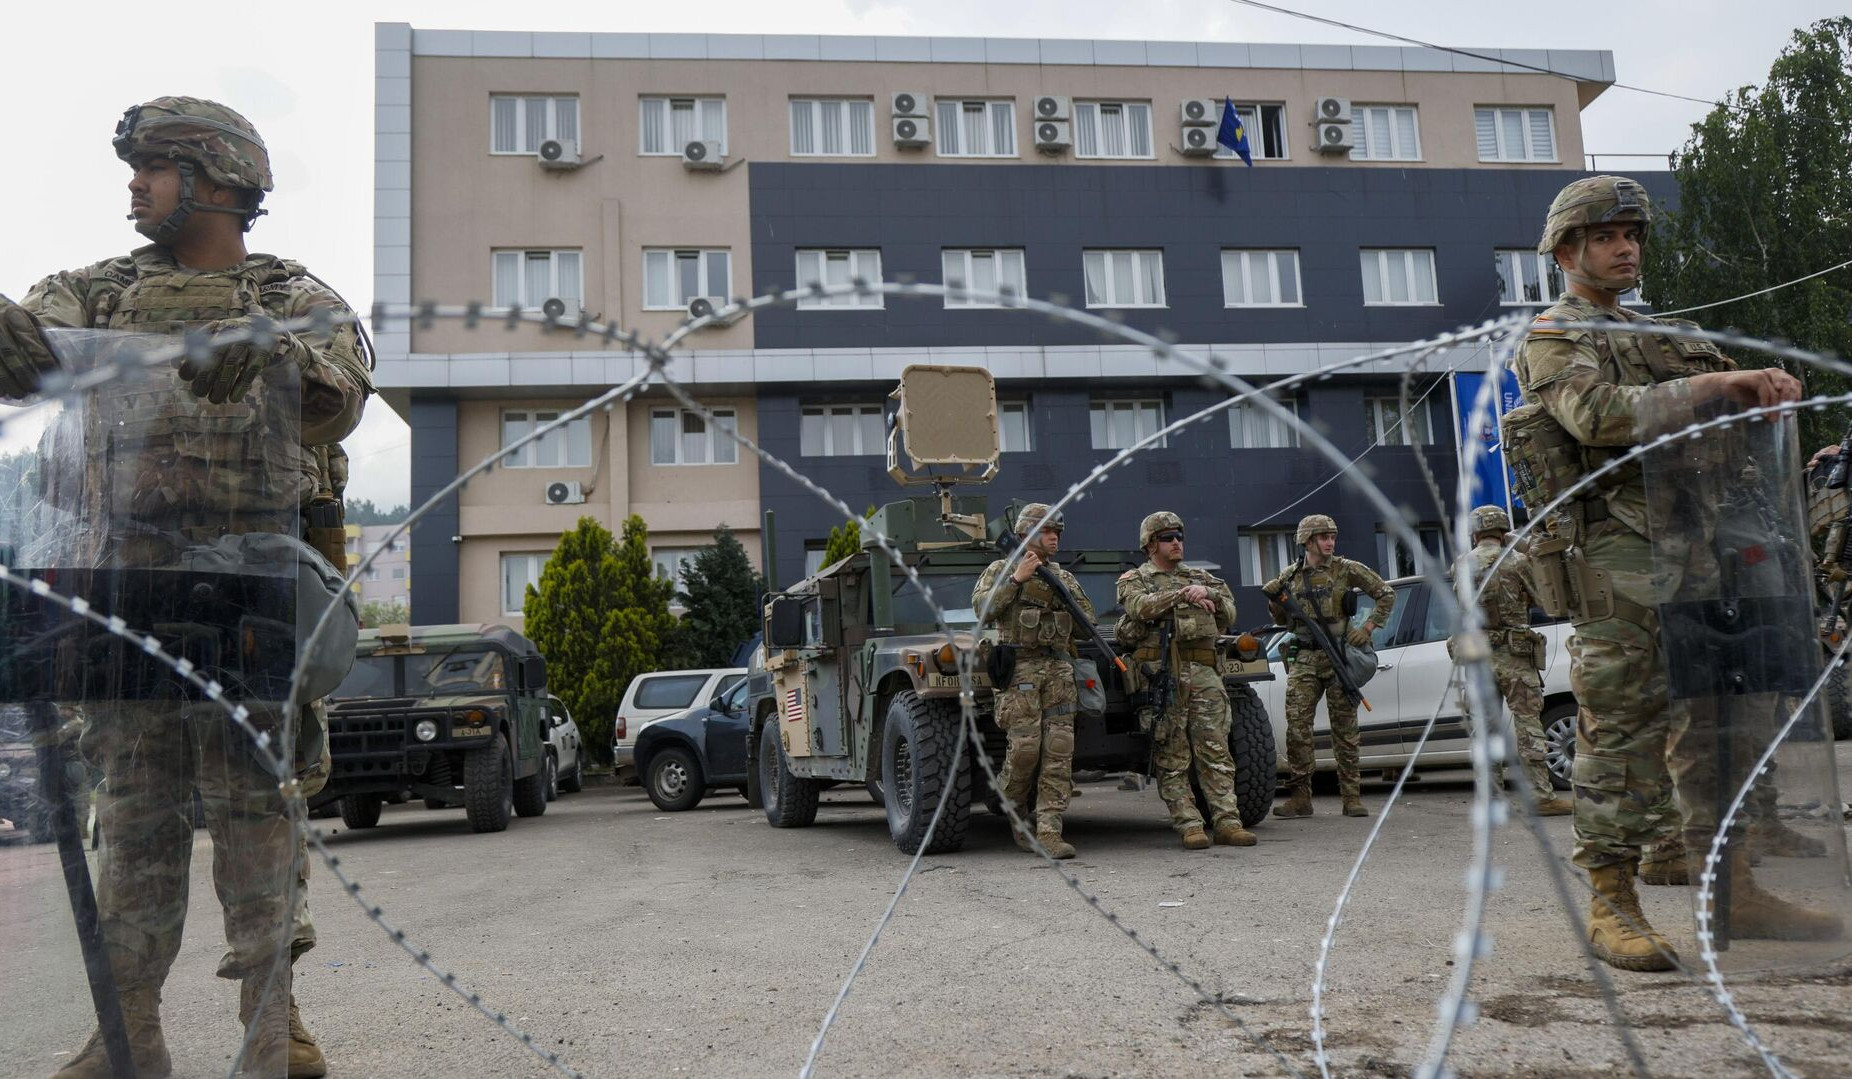 NATO soldiers injured while dispersing riot in northern Kosovo